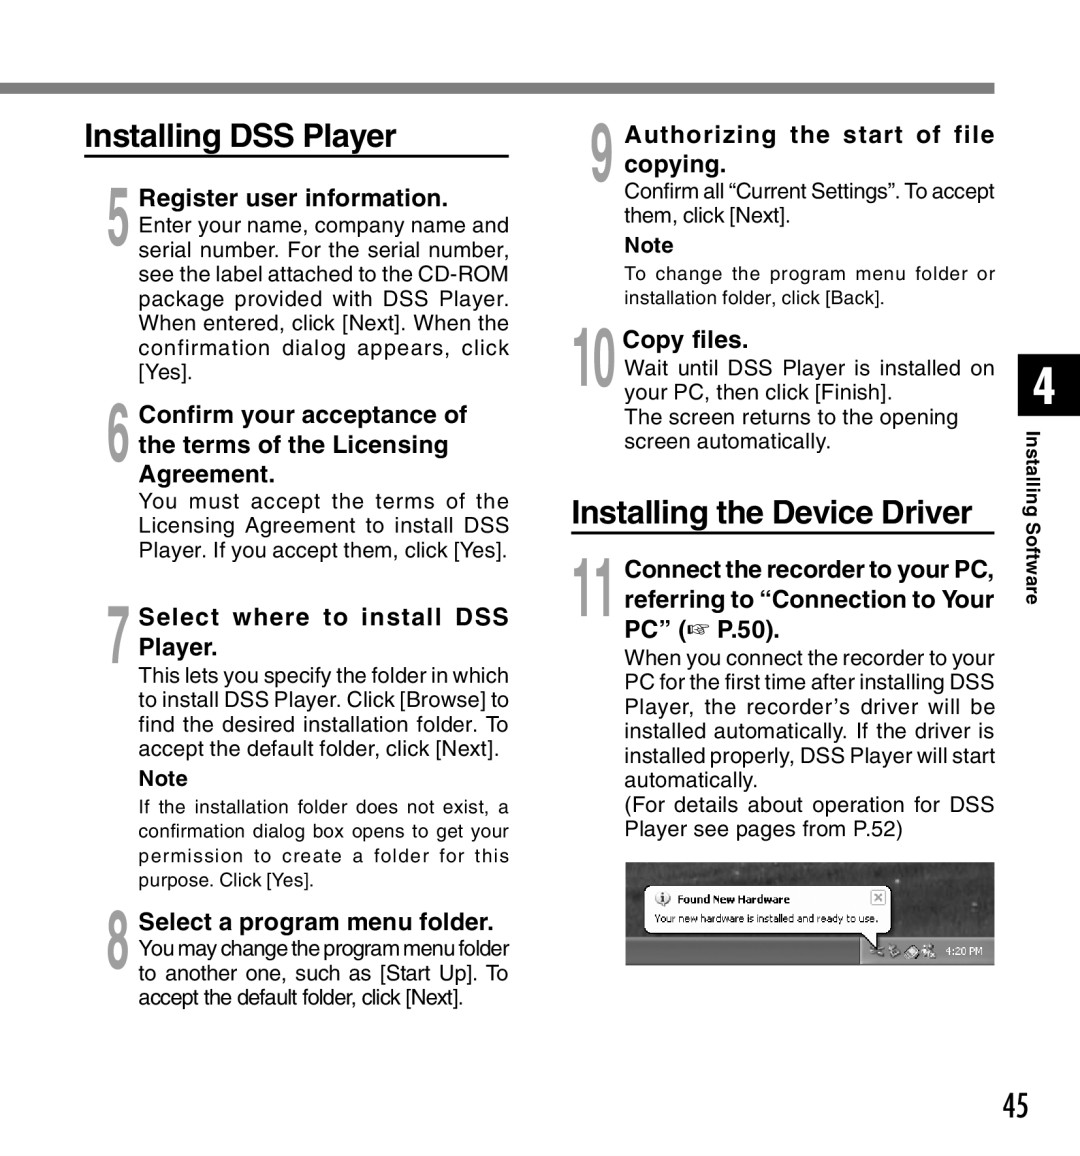 Olympus DS-2300 Installing DSS Player, Installing the Device Driver, Select where to install DSS Player, 10Copy files 